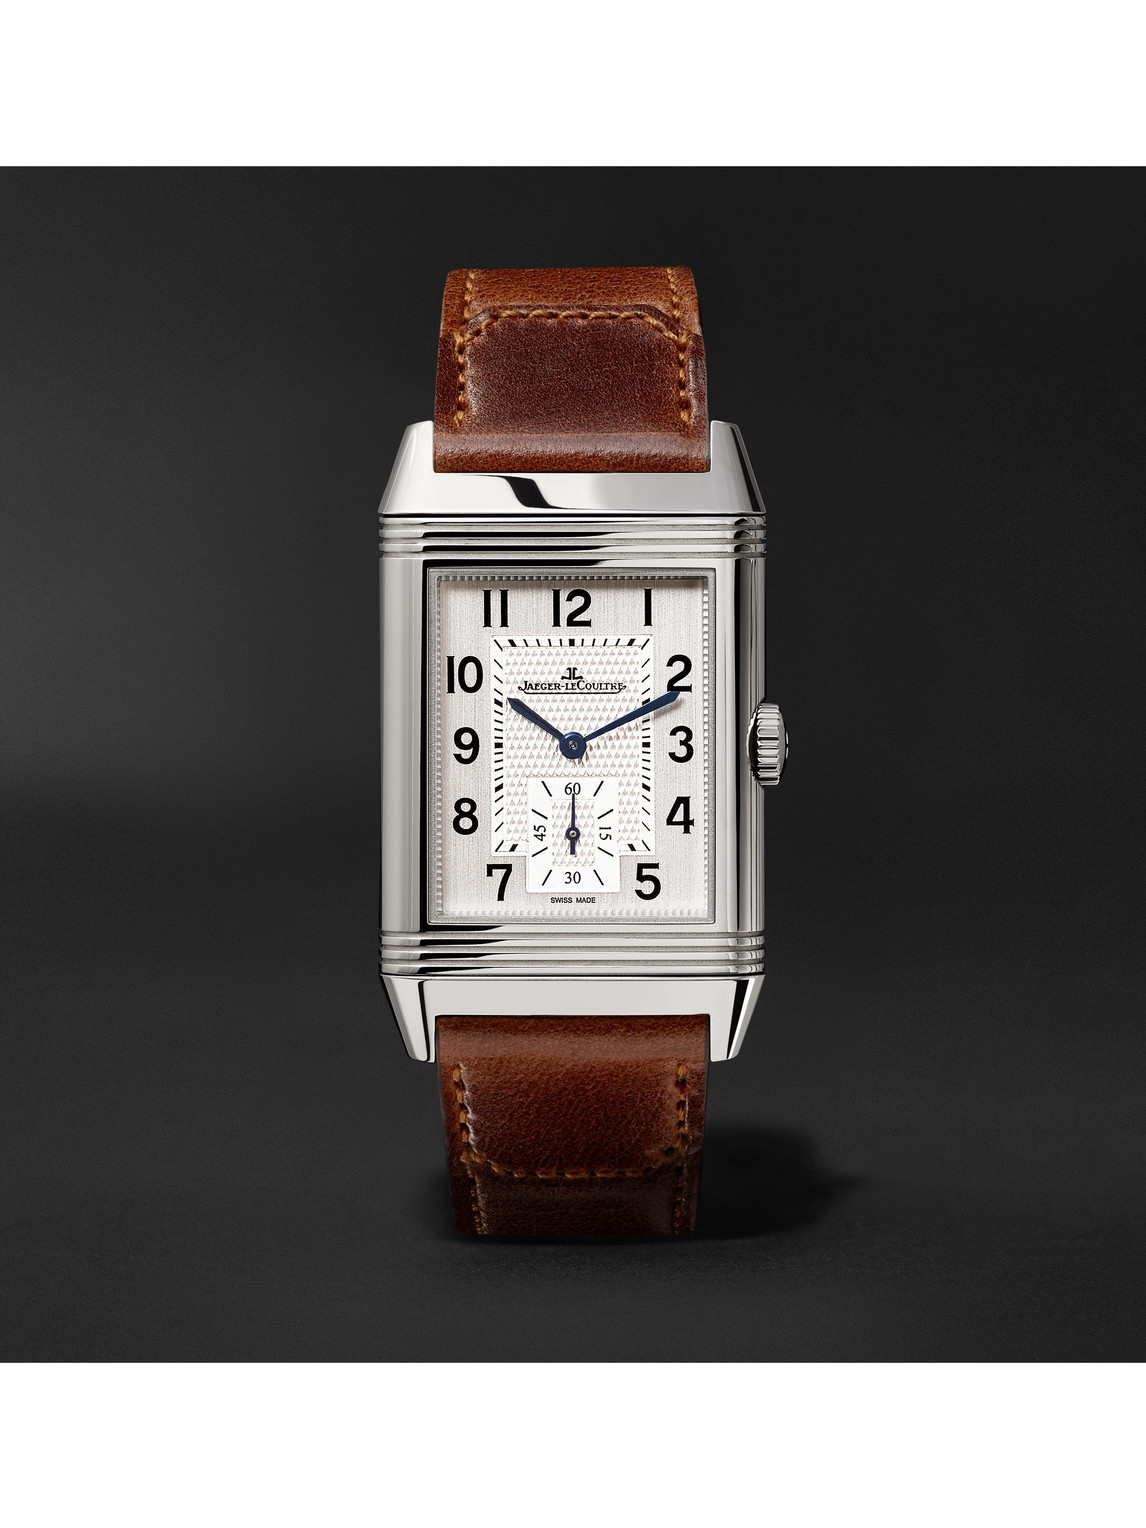 Jaeger-lecoultre Reverso Classic Large Duoface Hand-wound 47mm X 28.3mm Stainless Steel And Leather Watch, Ref. No. Q In White